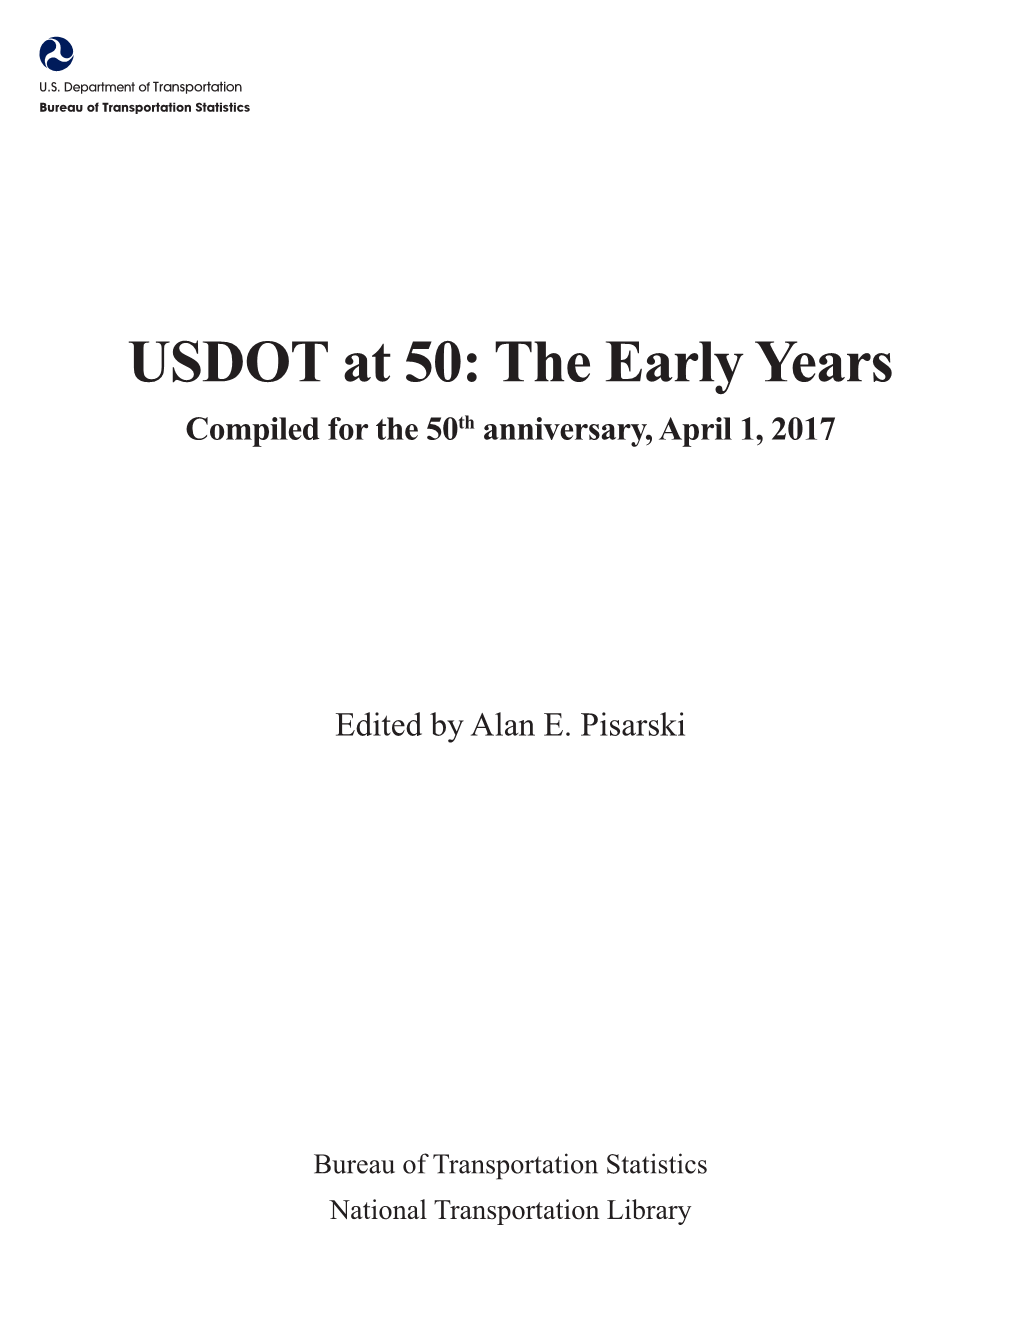 USDOT at 50: the Early Years Compiled for the 50Th Anniversary, April 1, 2017